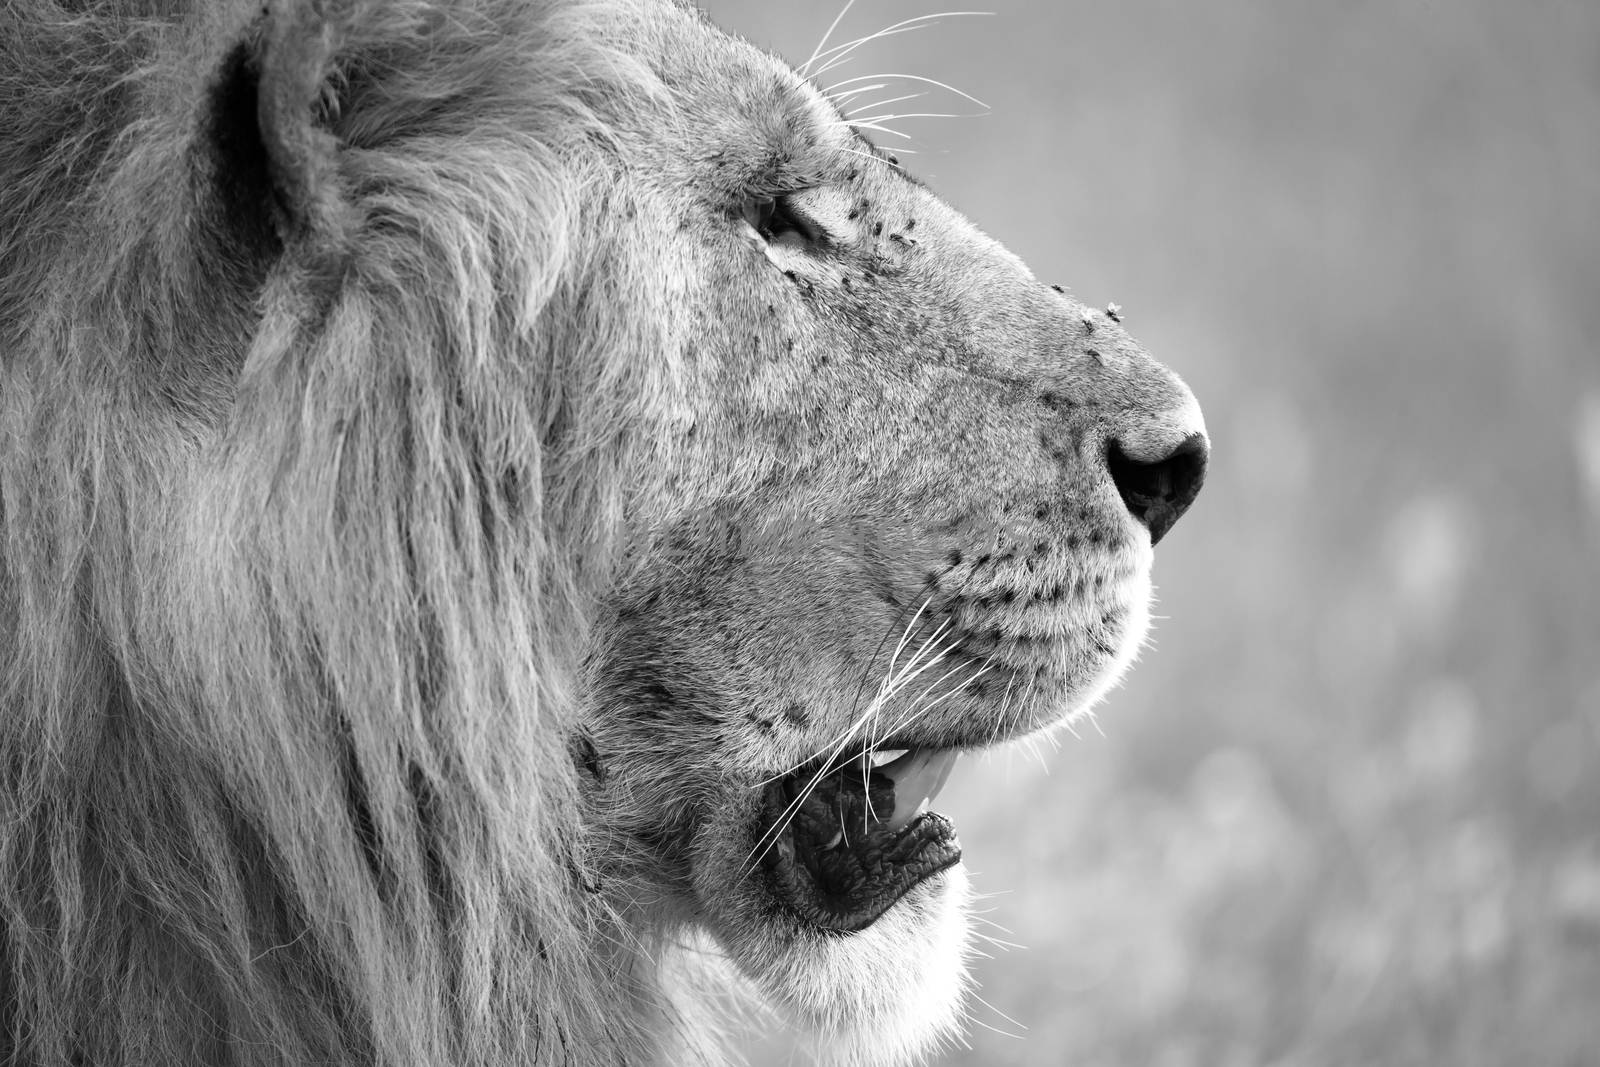 A close-up of the face of a lion in the savannah of Kenya by 25ehaag6